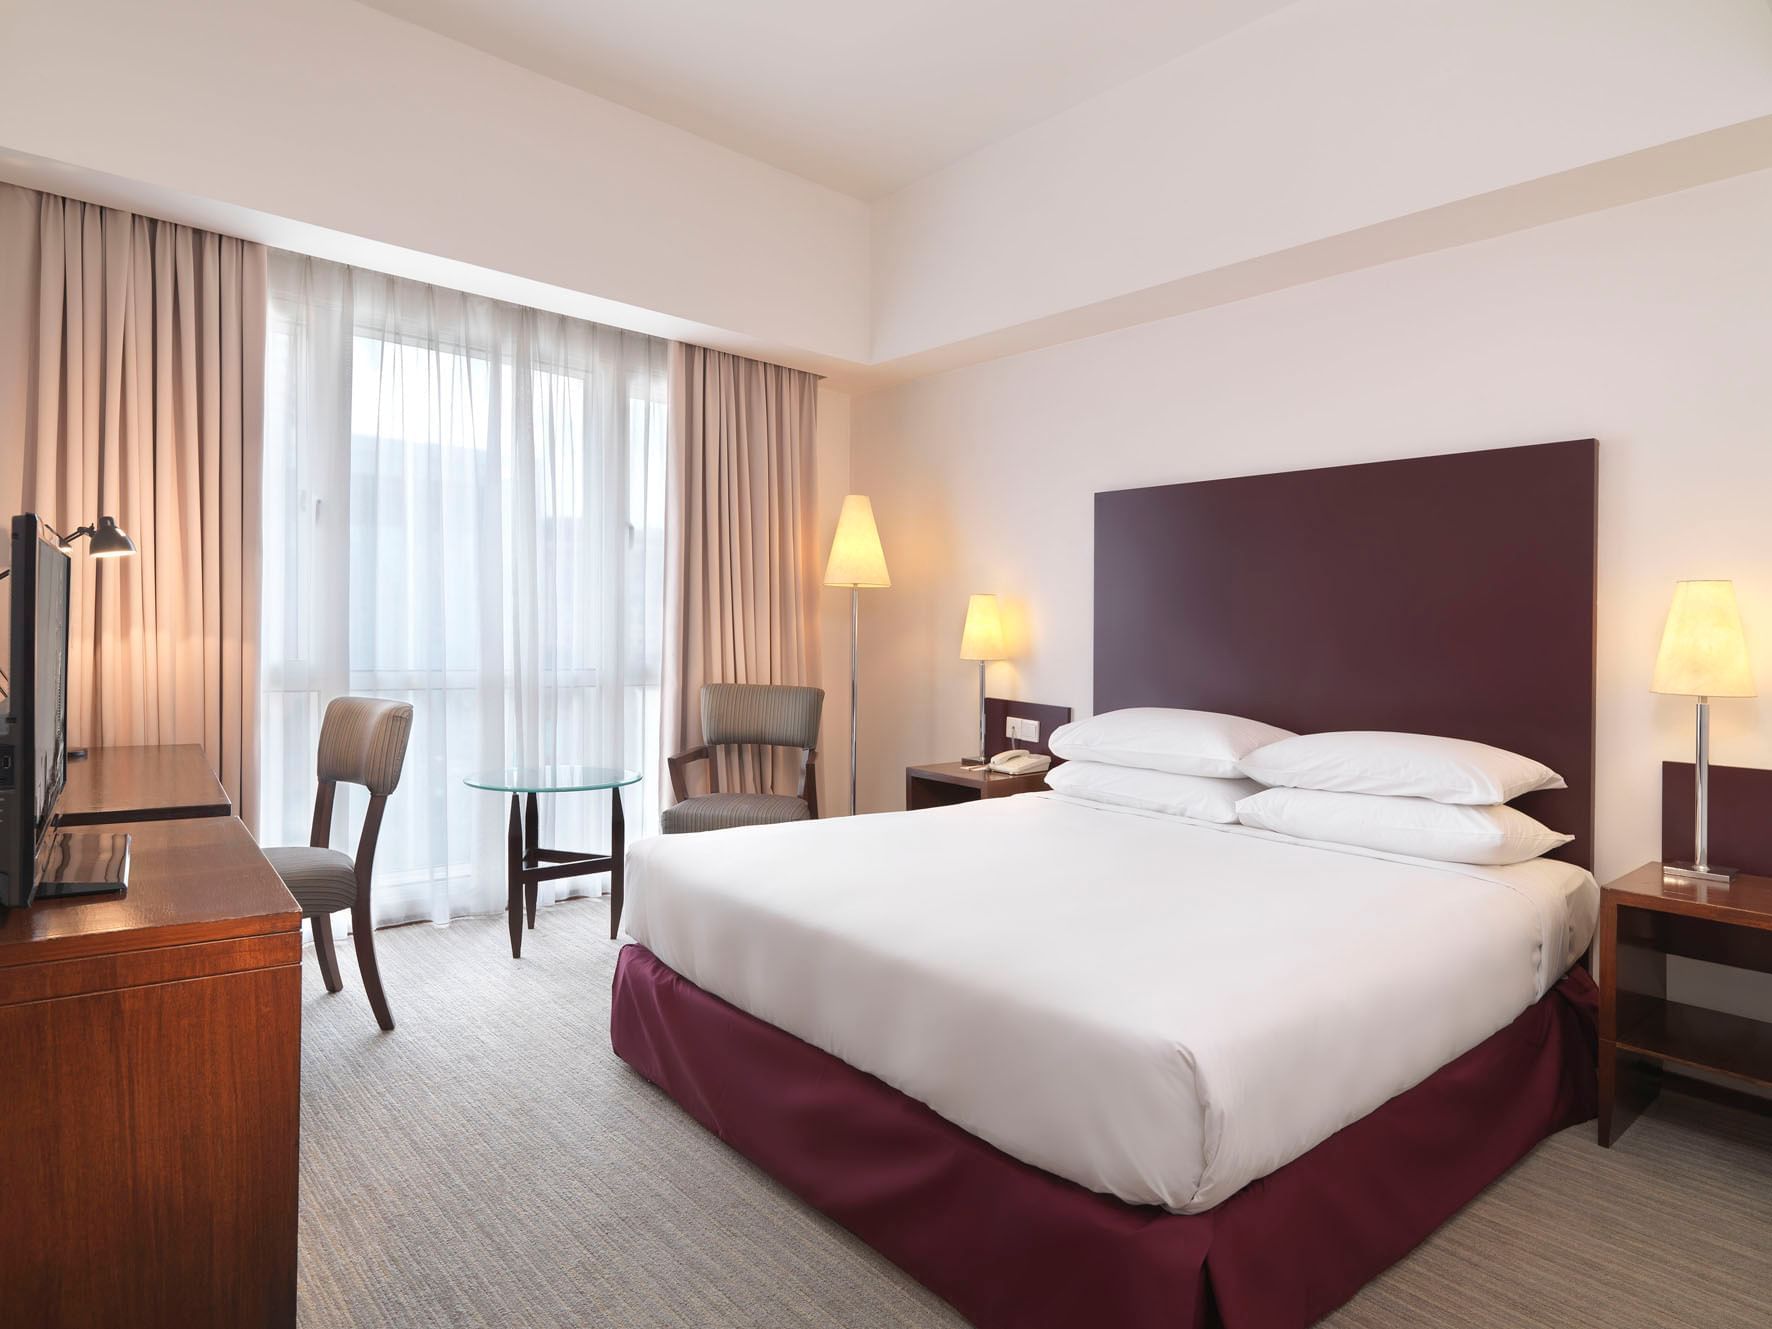 King bed & TV in Deluxe at Federal Hotels International